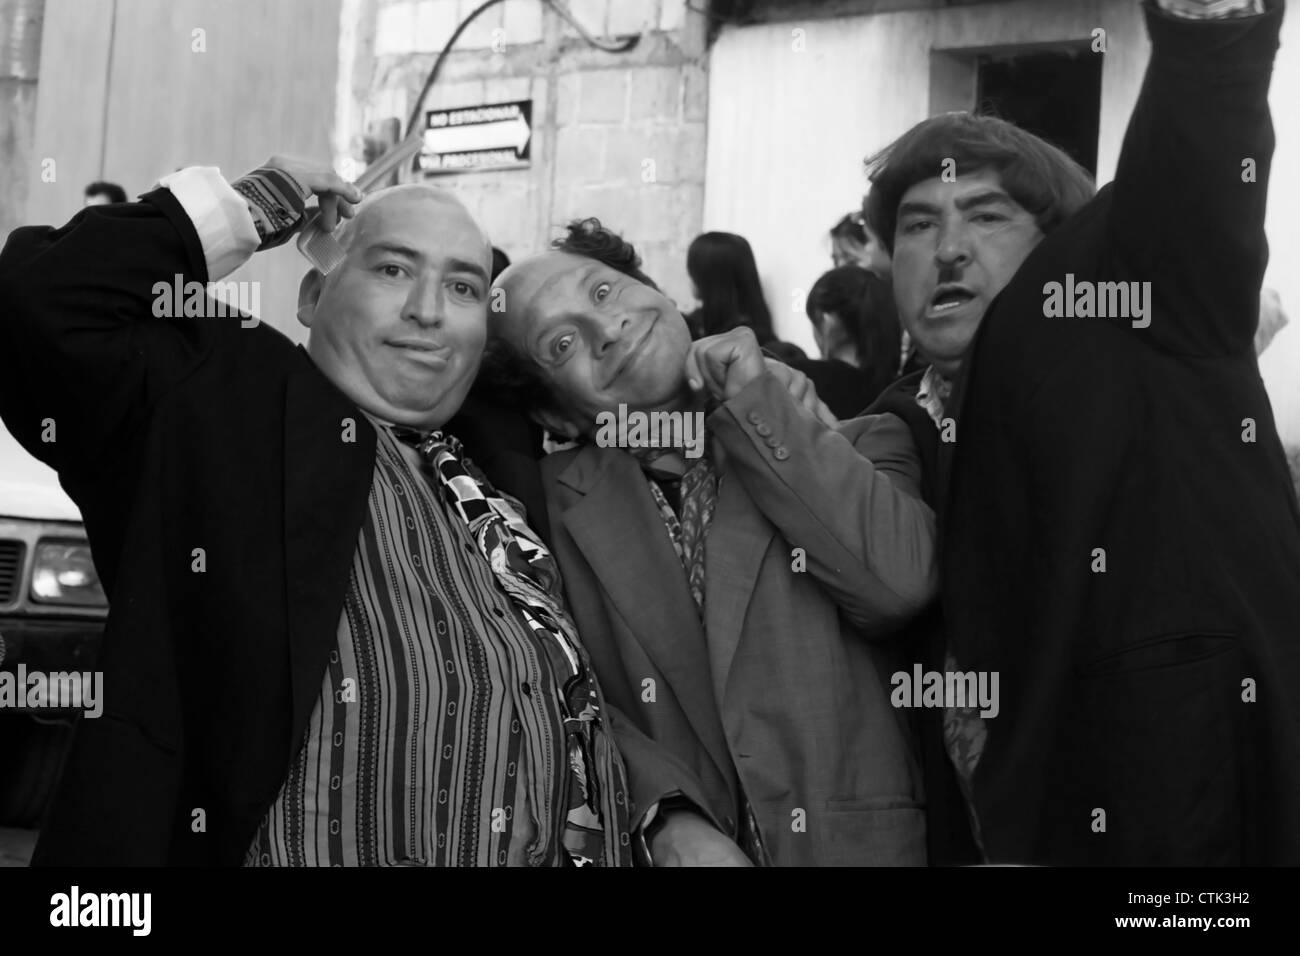 Men dressed as The three Stooges Stock Photo